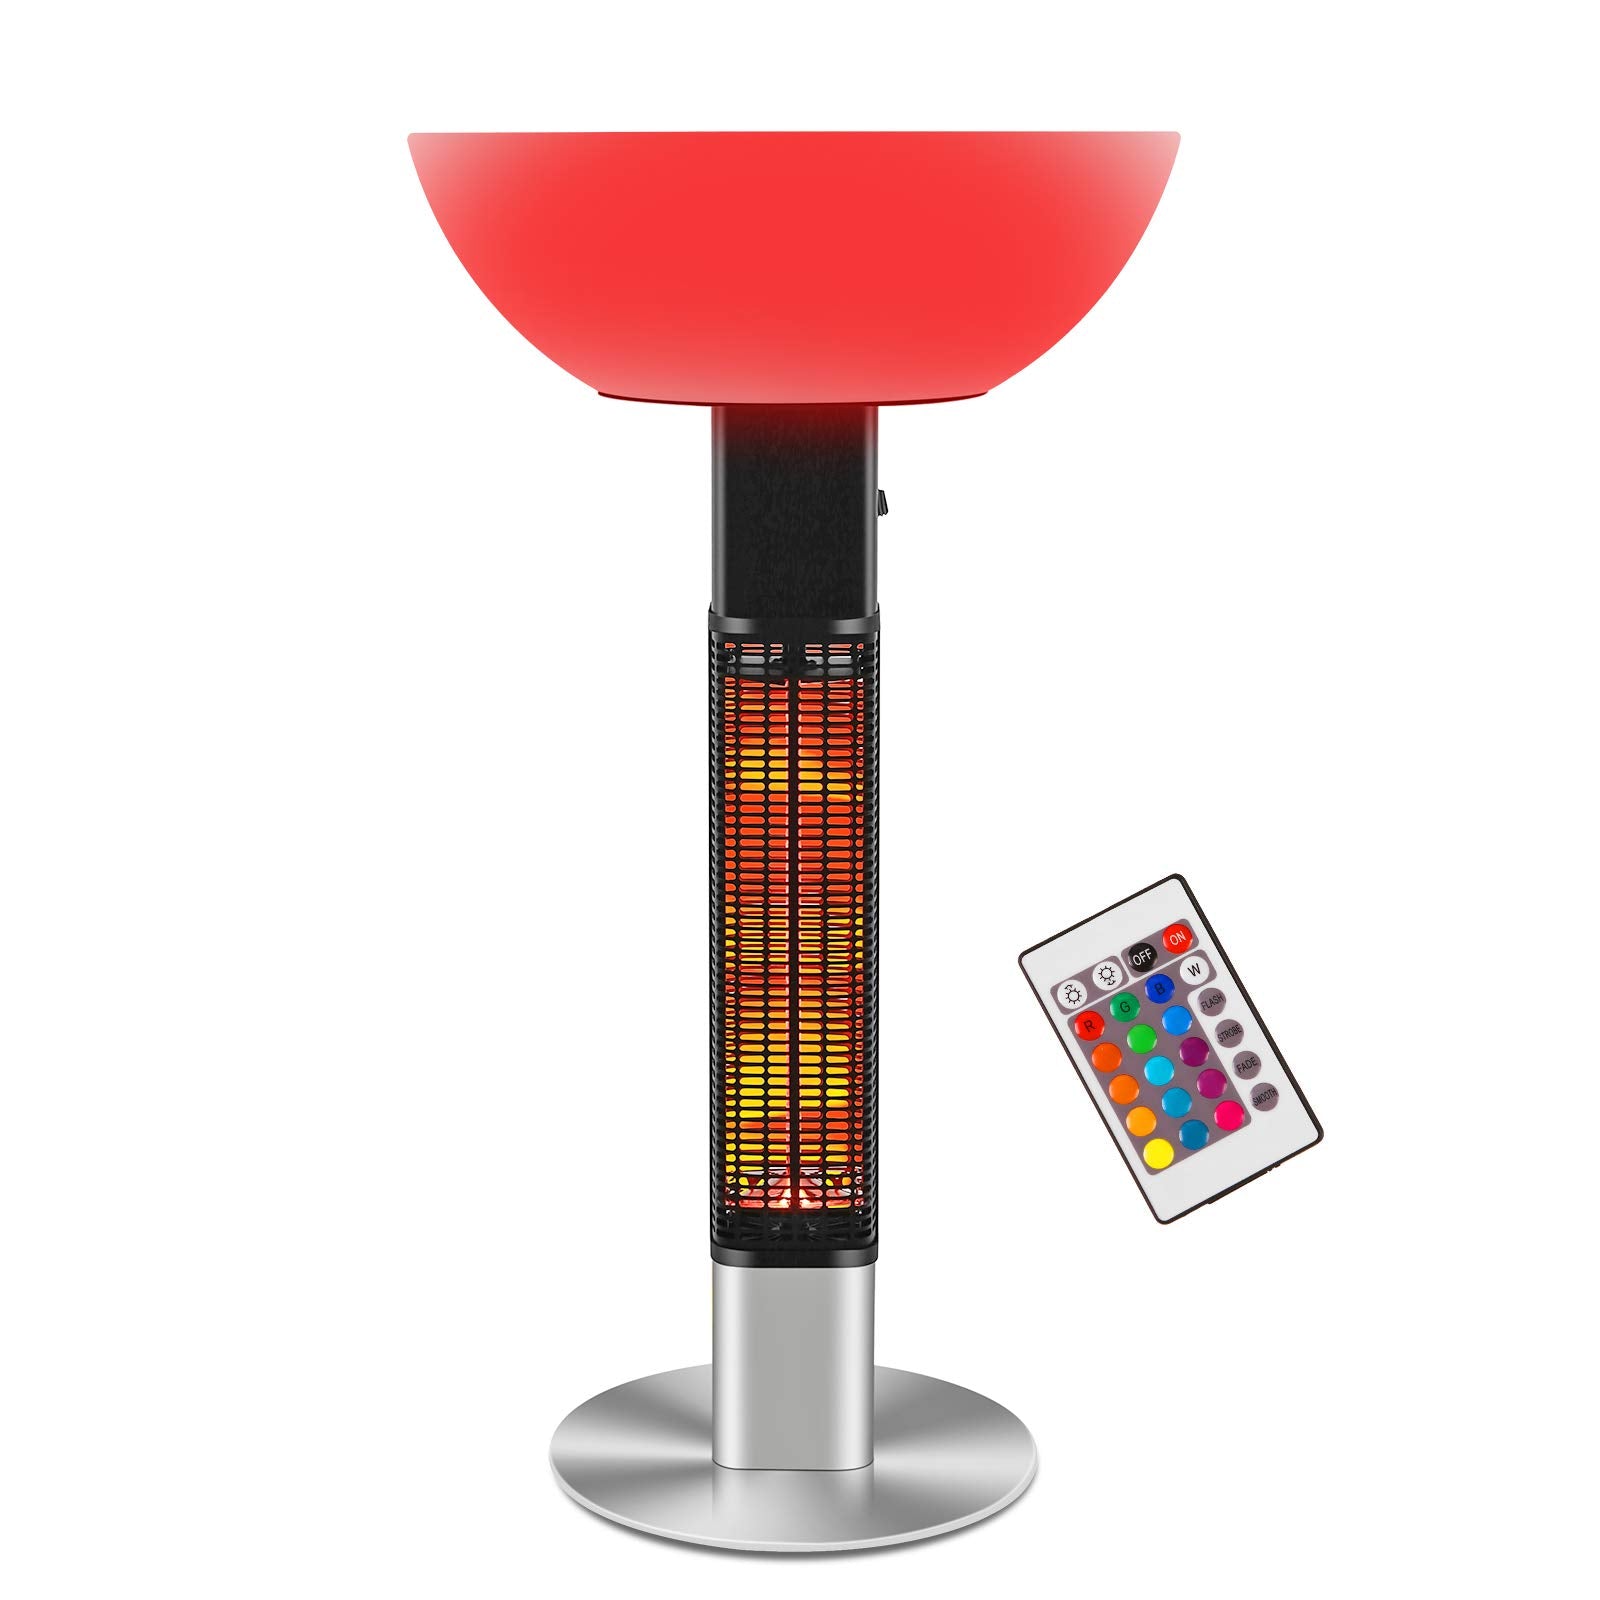 R.W.FLAME Outdoor Electric Patio Heater|Infrared Heater With Switch Display, 1500W